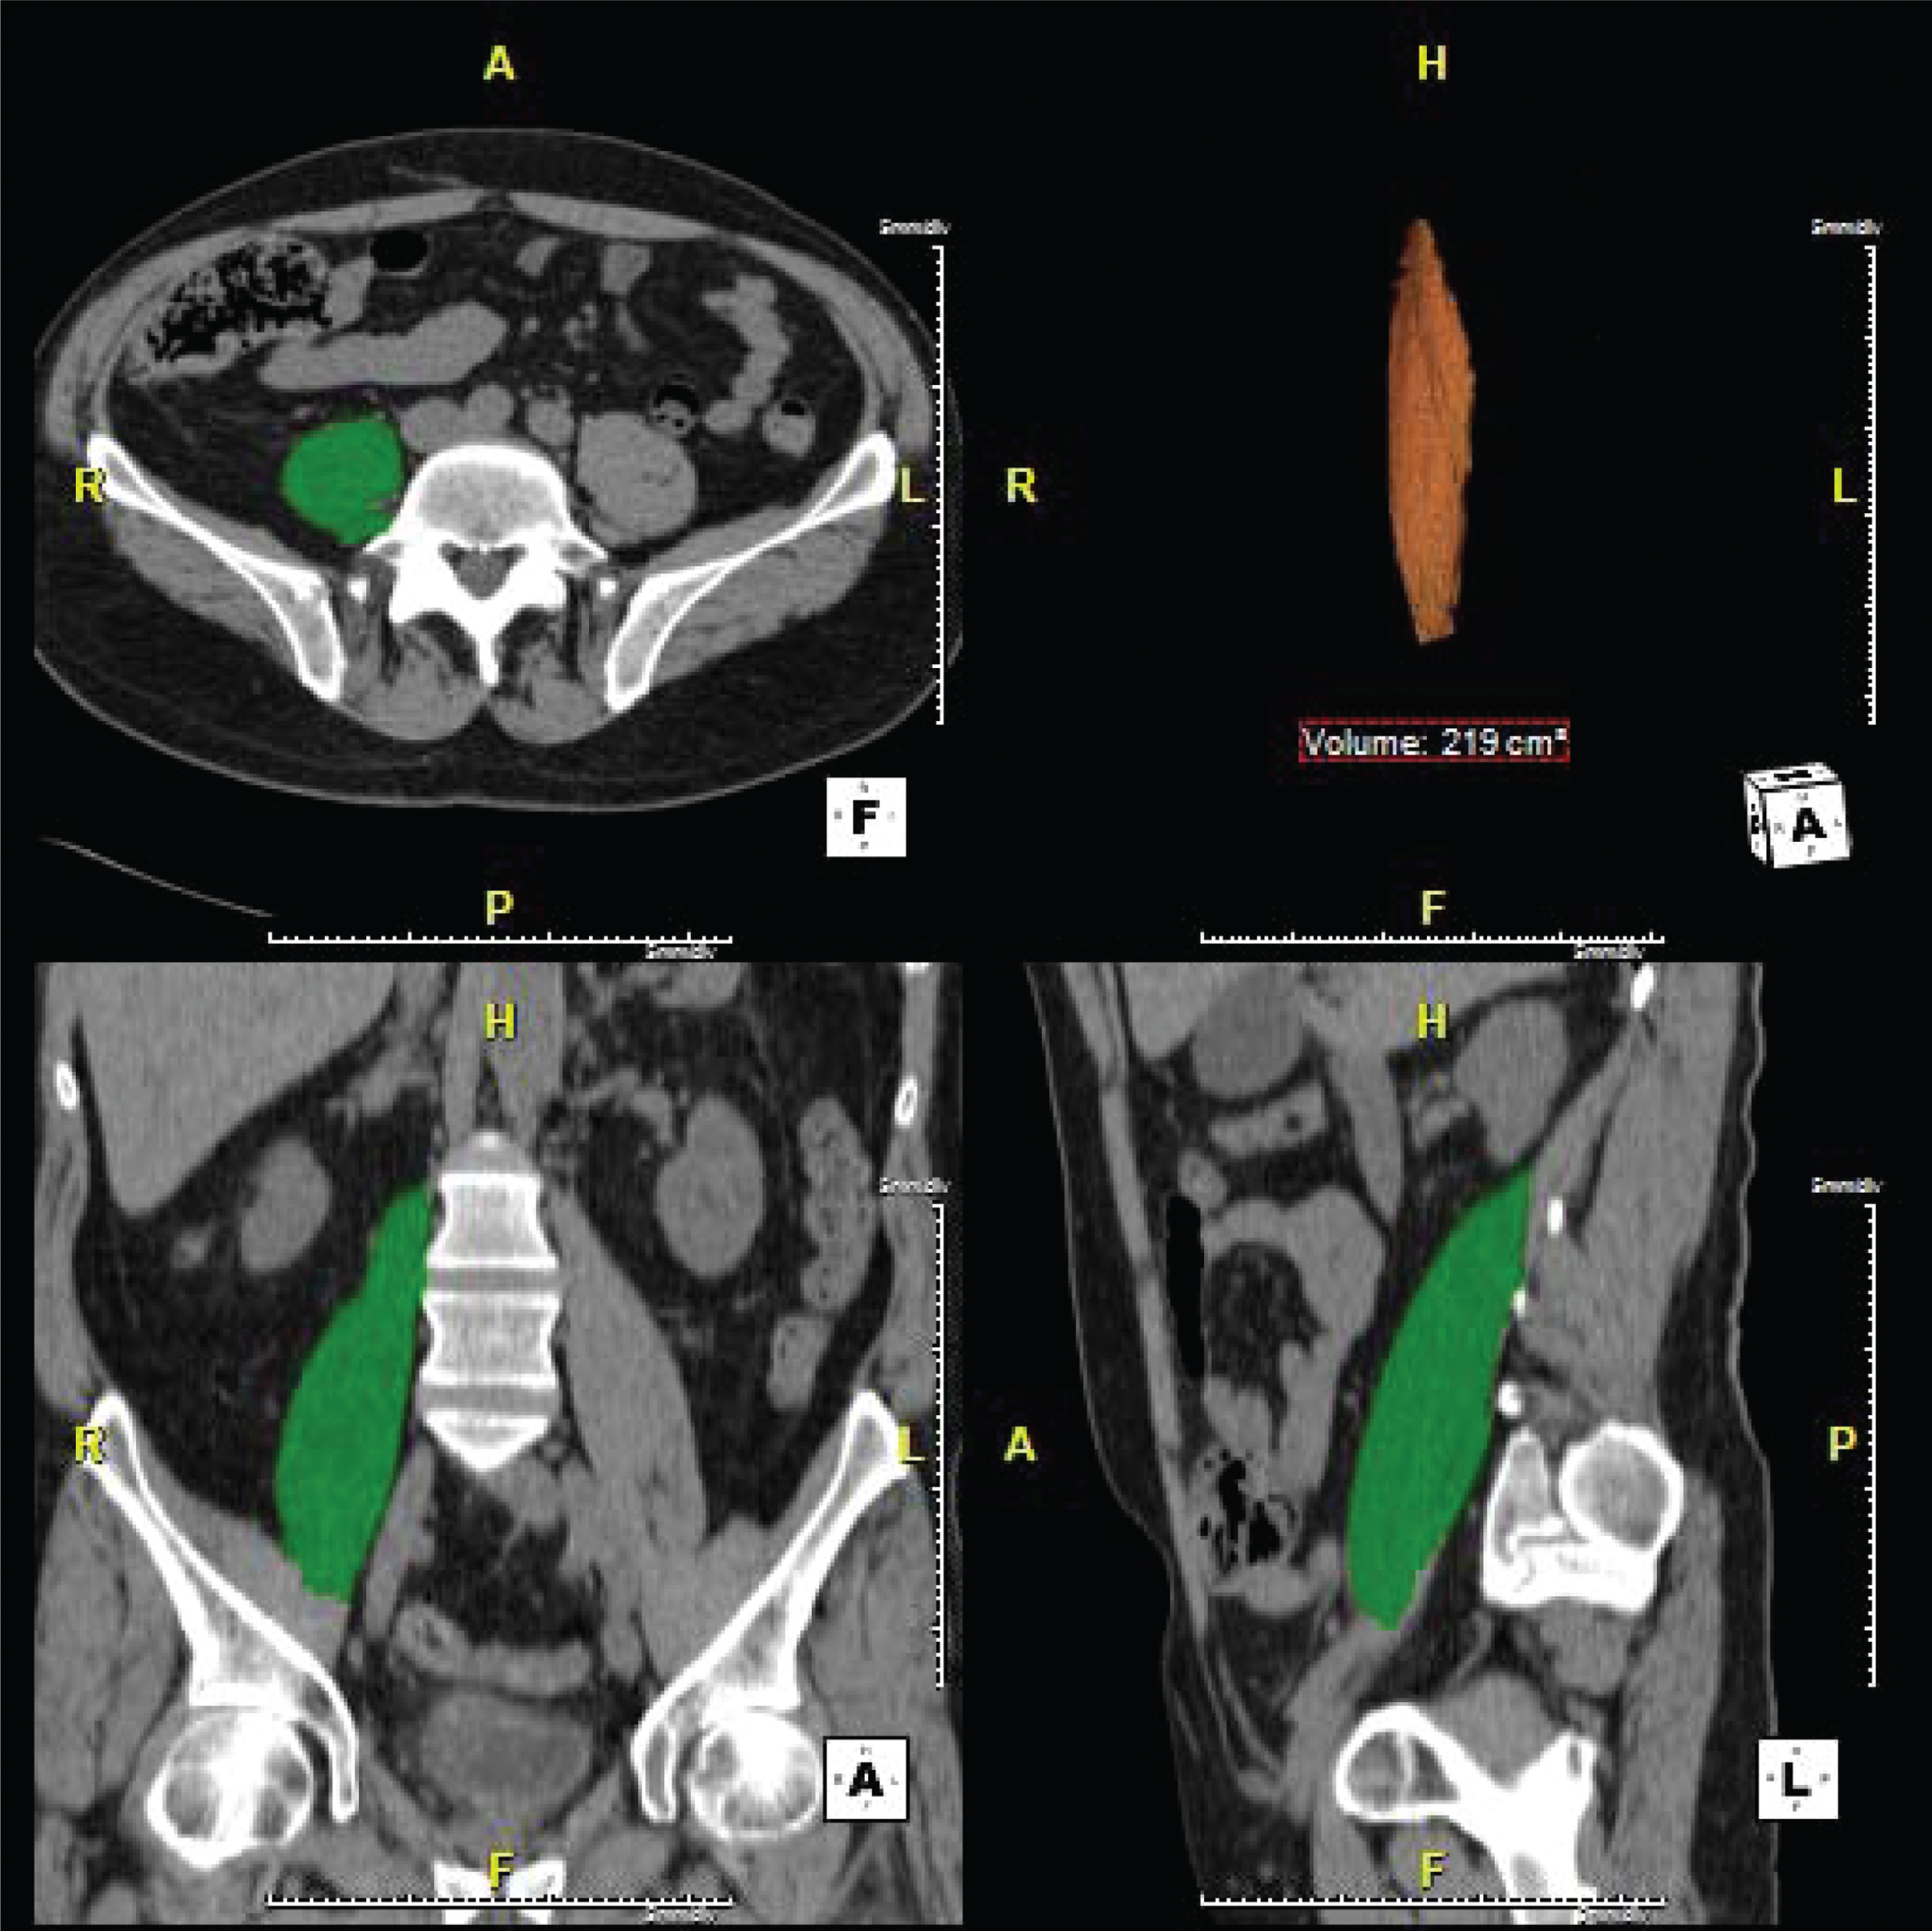 Cross sectional imaging demonstrating our method of psoas muscle volume assessment. Pre- and post- NAC psoas muscle volumes were measured from the origin of psoas at the level of the lumbar vertebrae to its insertion in the lesser trochanter on CT datasets using a semi-automatic segmentation method. The proportional change in psoas muscle volume (PMV) was calculated by dividing the change in PMV by the pre-NAC PMV (ΔPMV/pre-NAC PMV) and is reported as percentage of PMV.